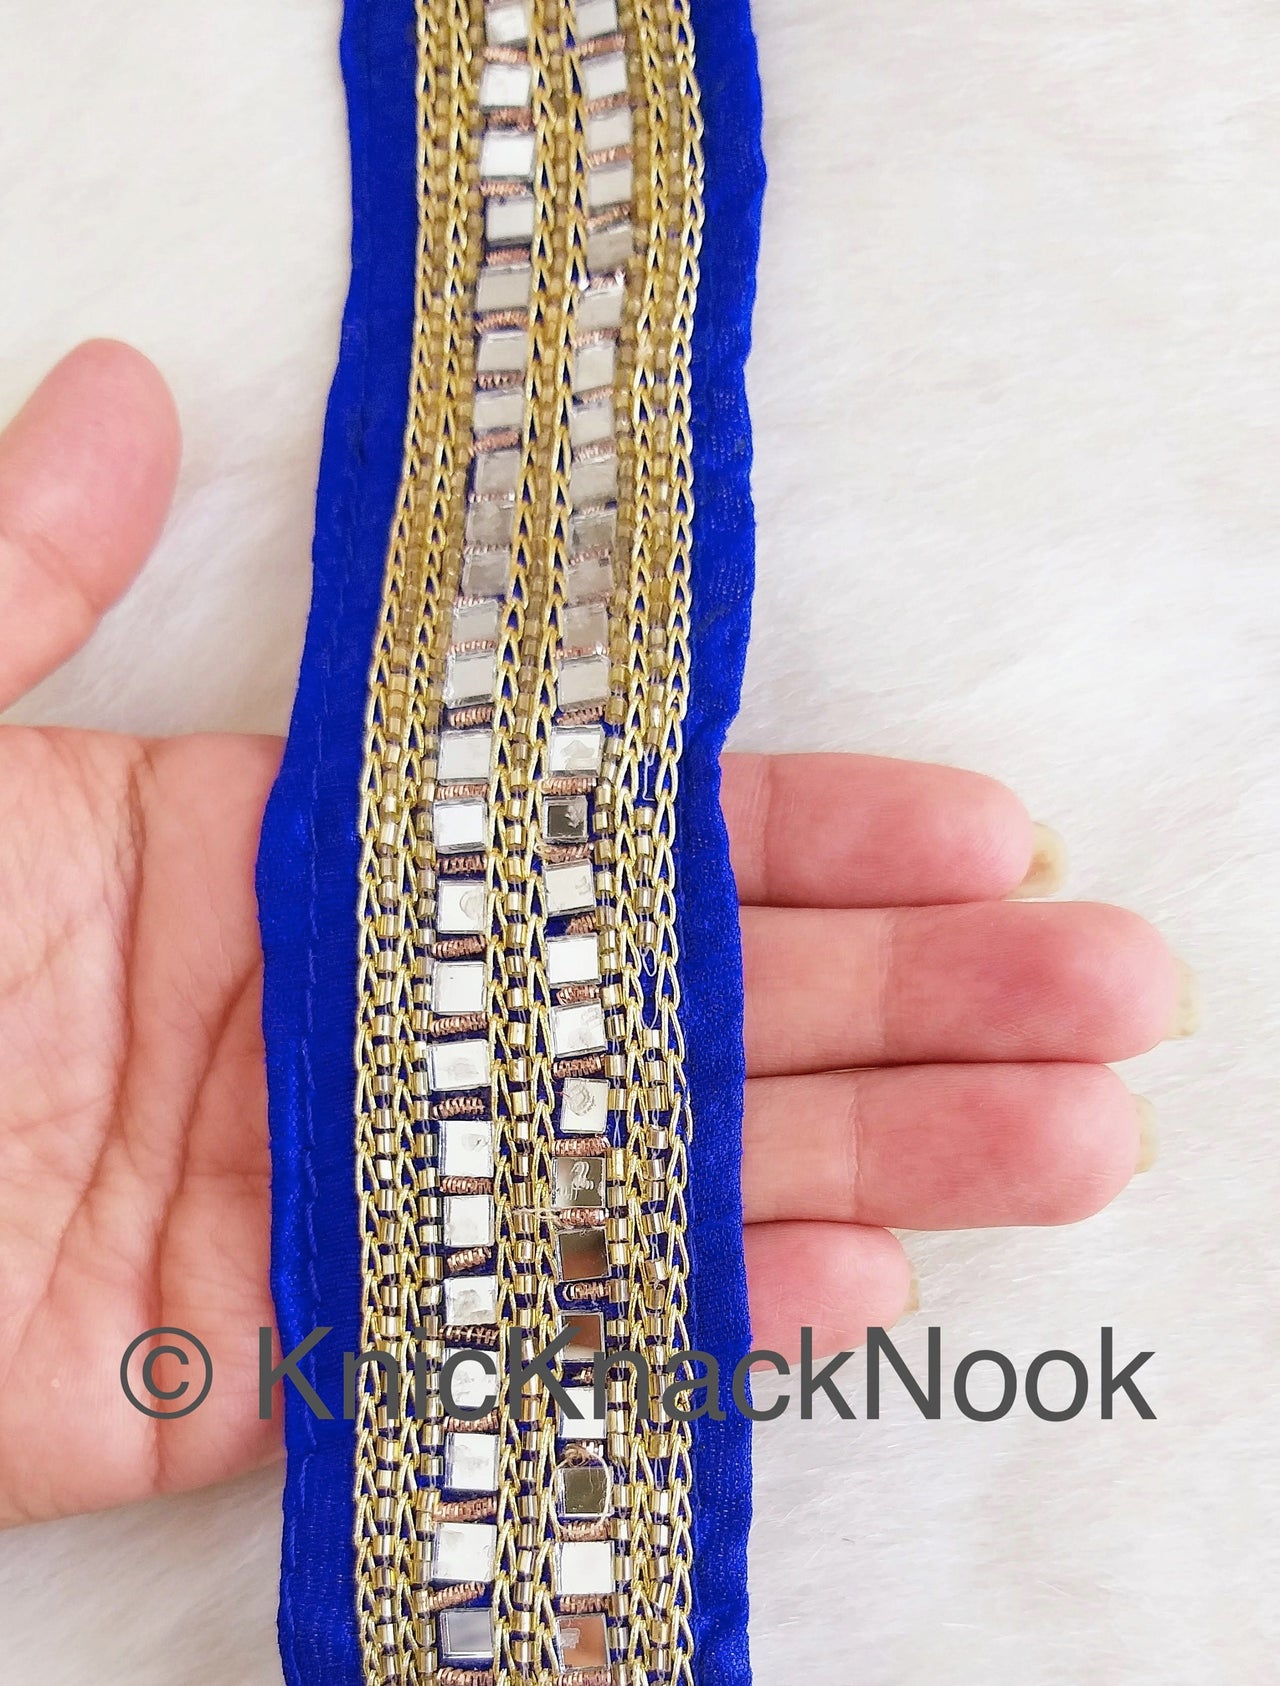 Royal Blue Fabric Trim With Mirrors Embellishments, Gold Beads and Gold Embroidery, Approx. 45mm Wide Decorative Craft Trims